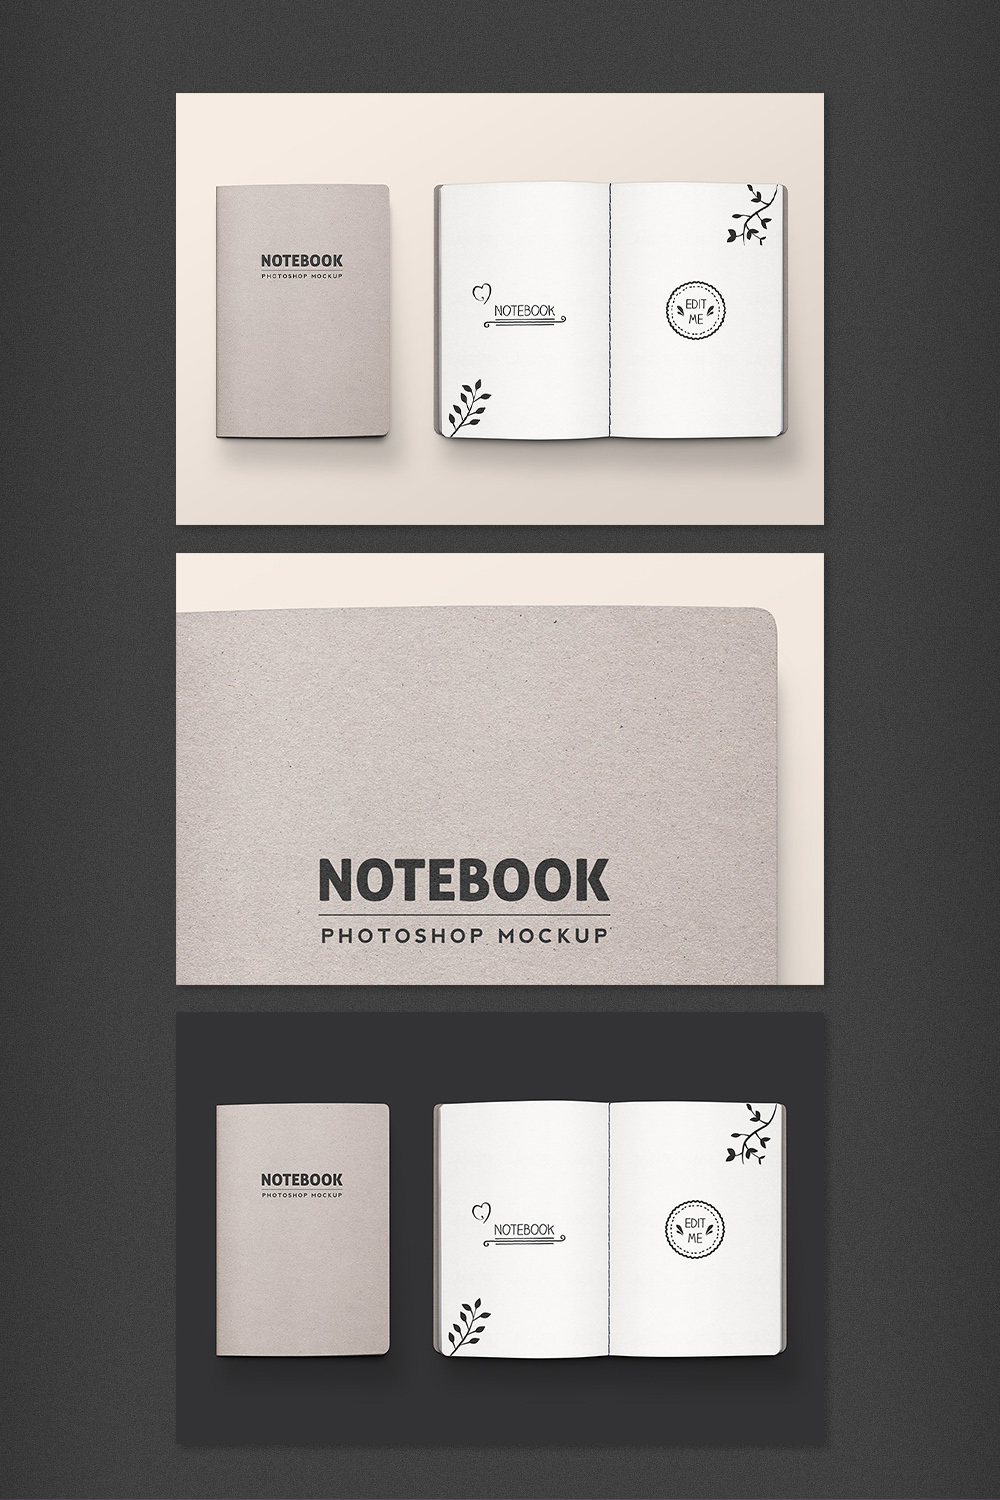 Stitched notebook images cover with irresistible design.